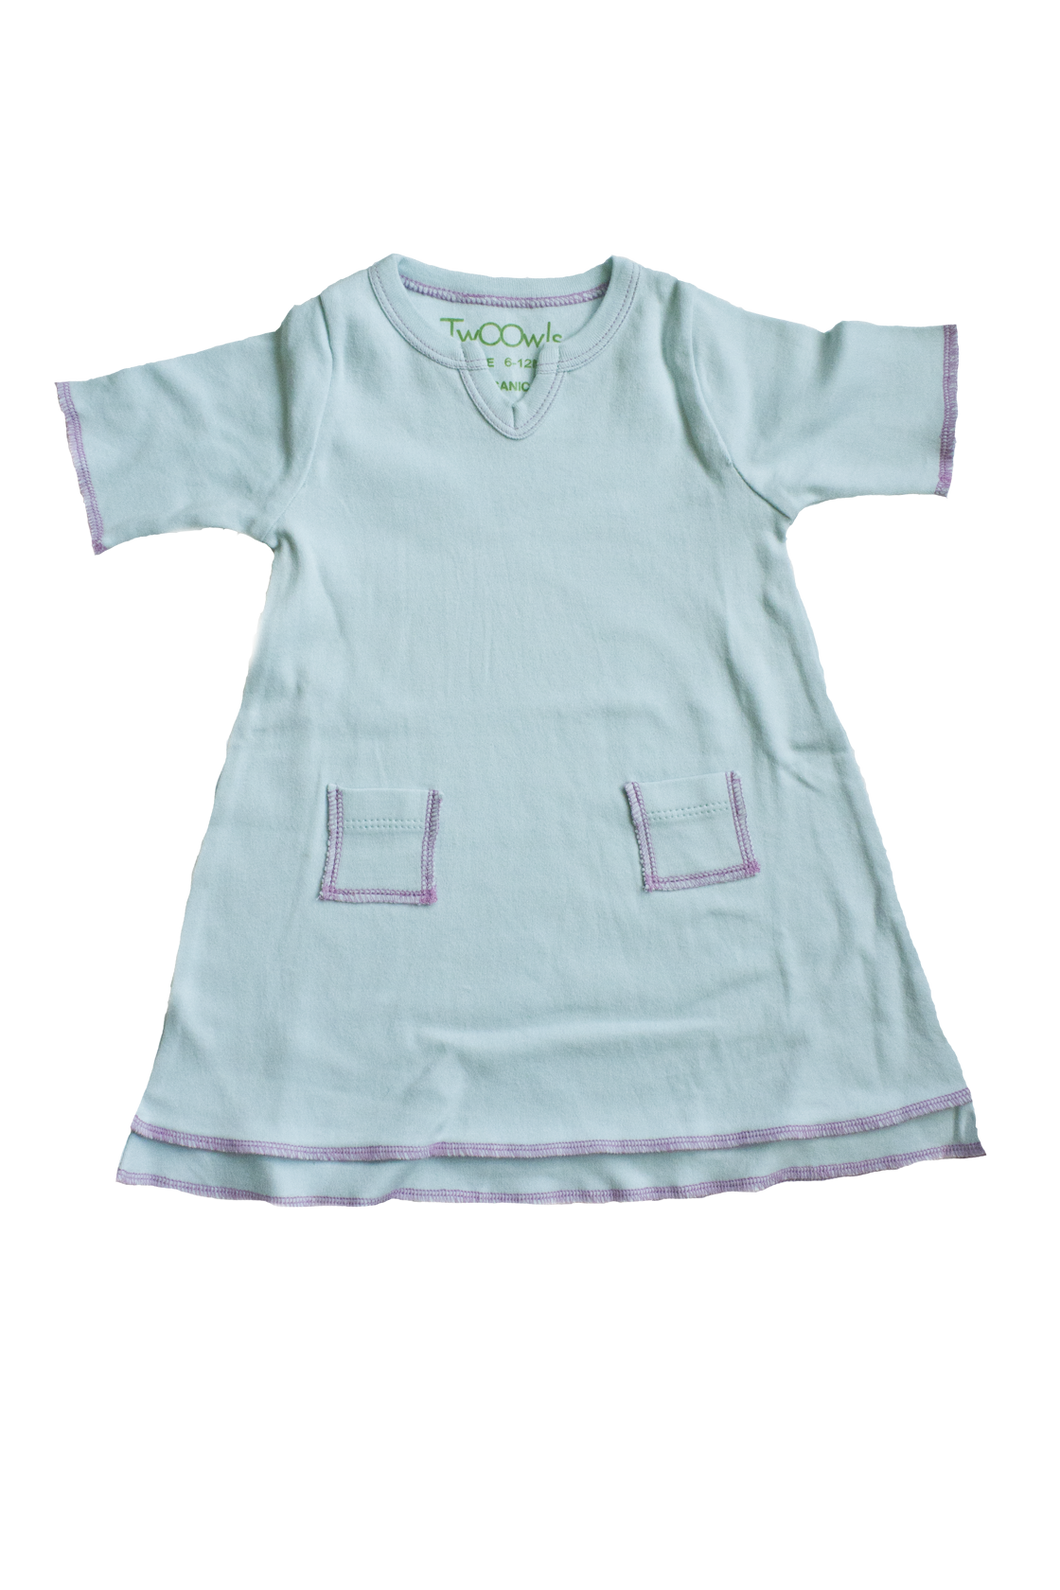 TwOOwls Turquoise/Pink Baby Tunic Dress -100% organic cotton